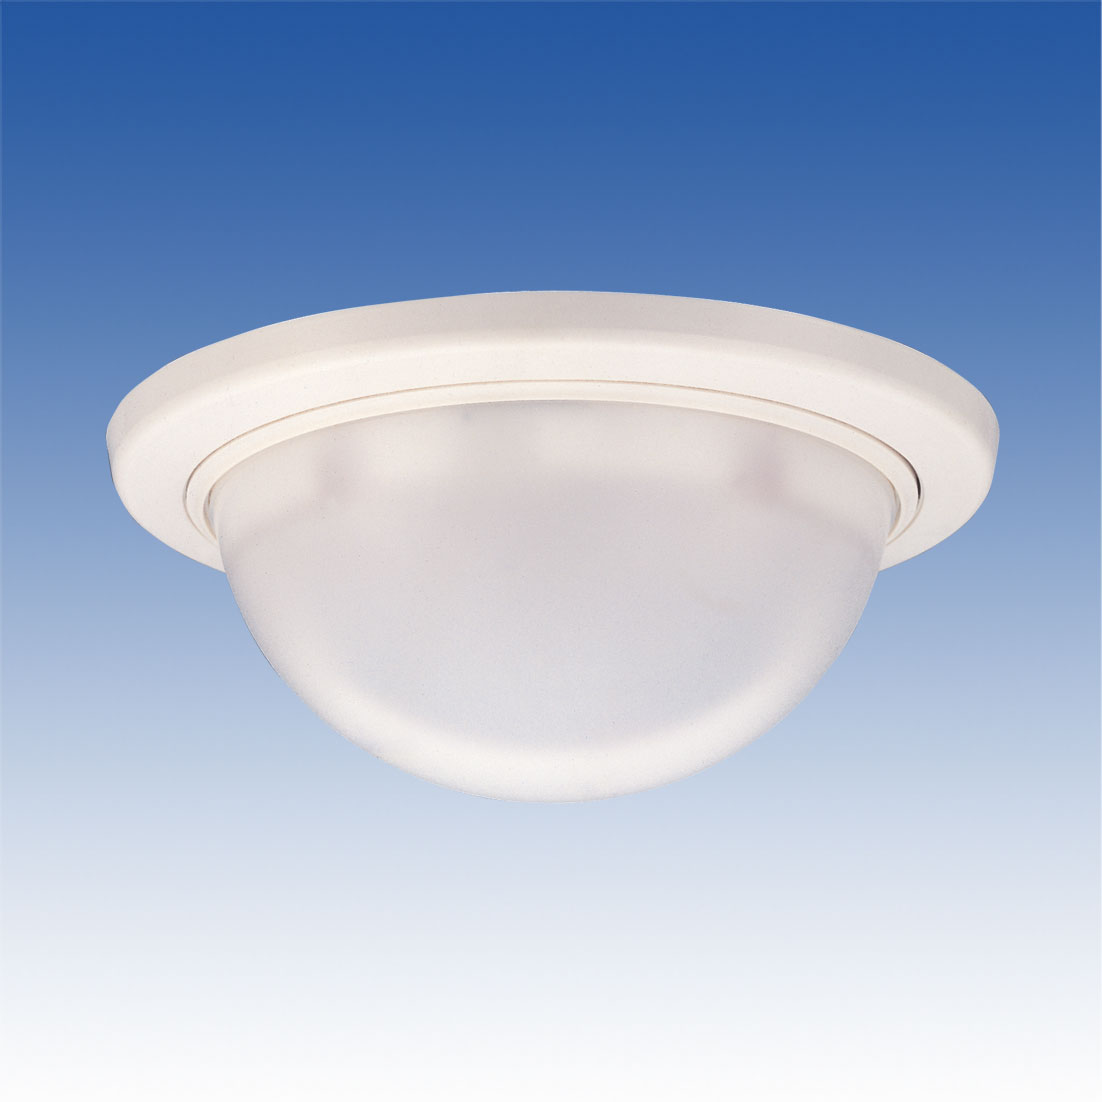 TAKEX HARDWIRED 360° PIR WHITE 1 x SPST CONFIGURABLE OUTPUT (DRY) PLASTIC CEILING/WALL MOUNT UPTO 4.9M MOUNT HEIGHT 10.5-28VDC SNAP-IN SMALL DOME